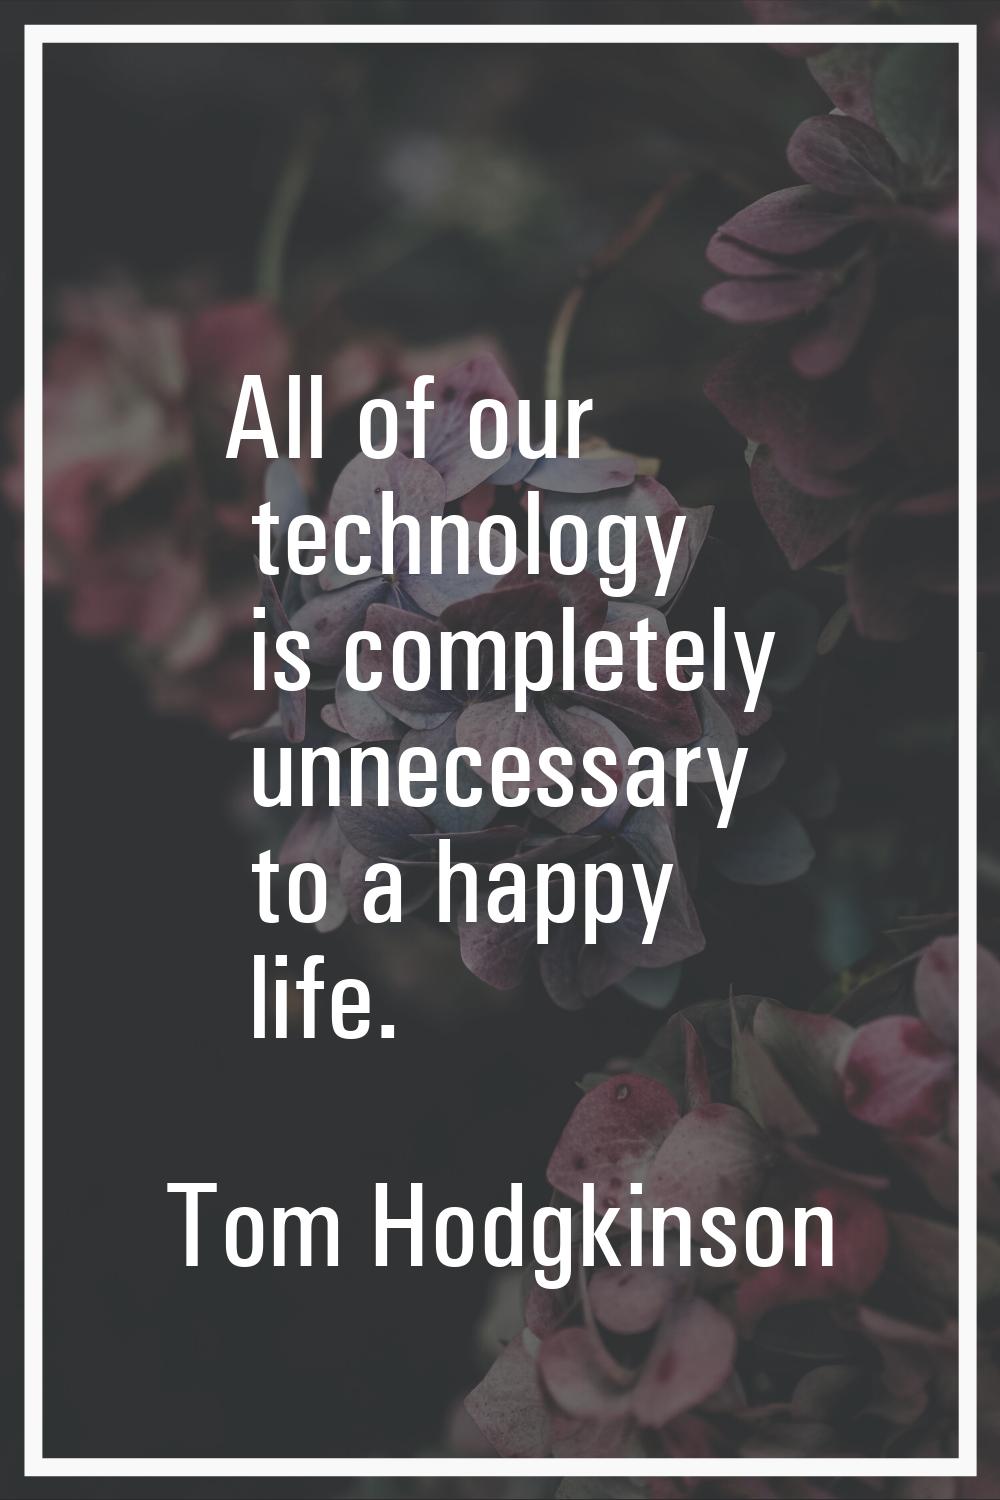 All of our technology is completely unnecessary to a happy life.